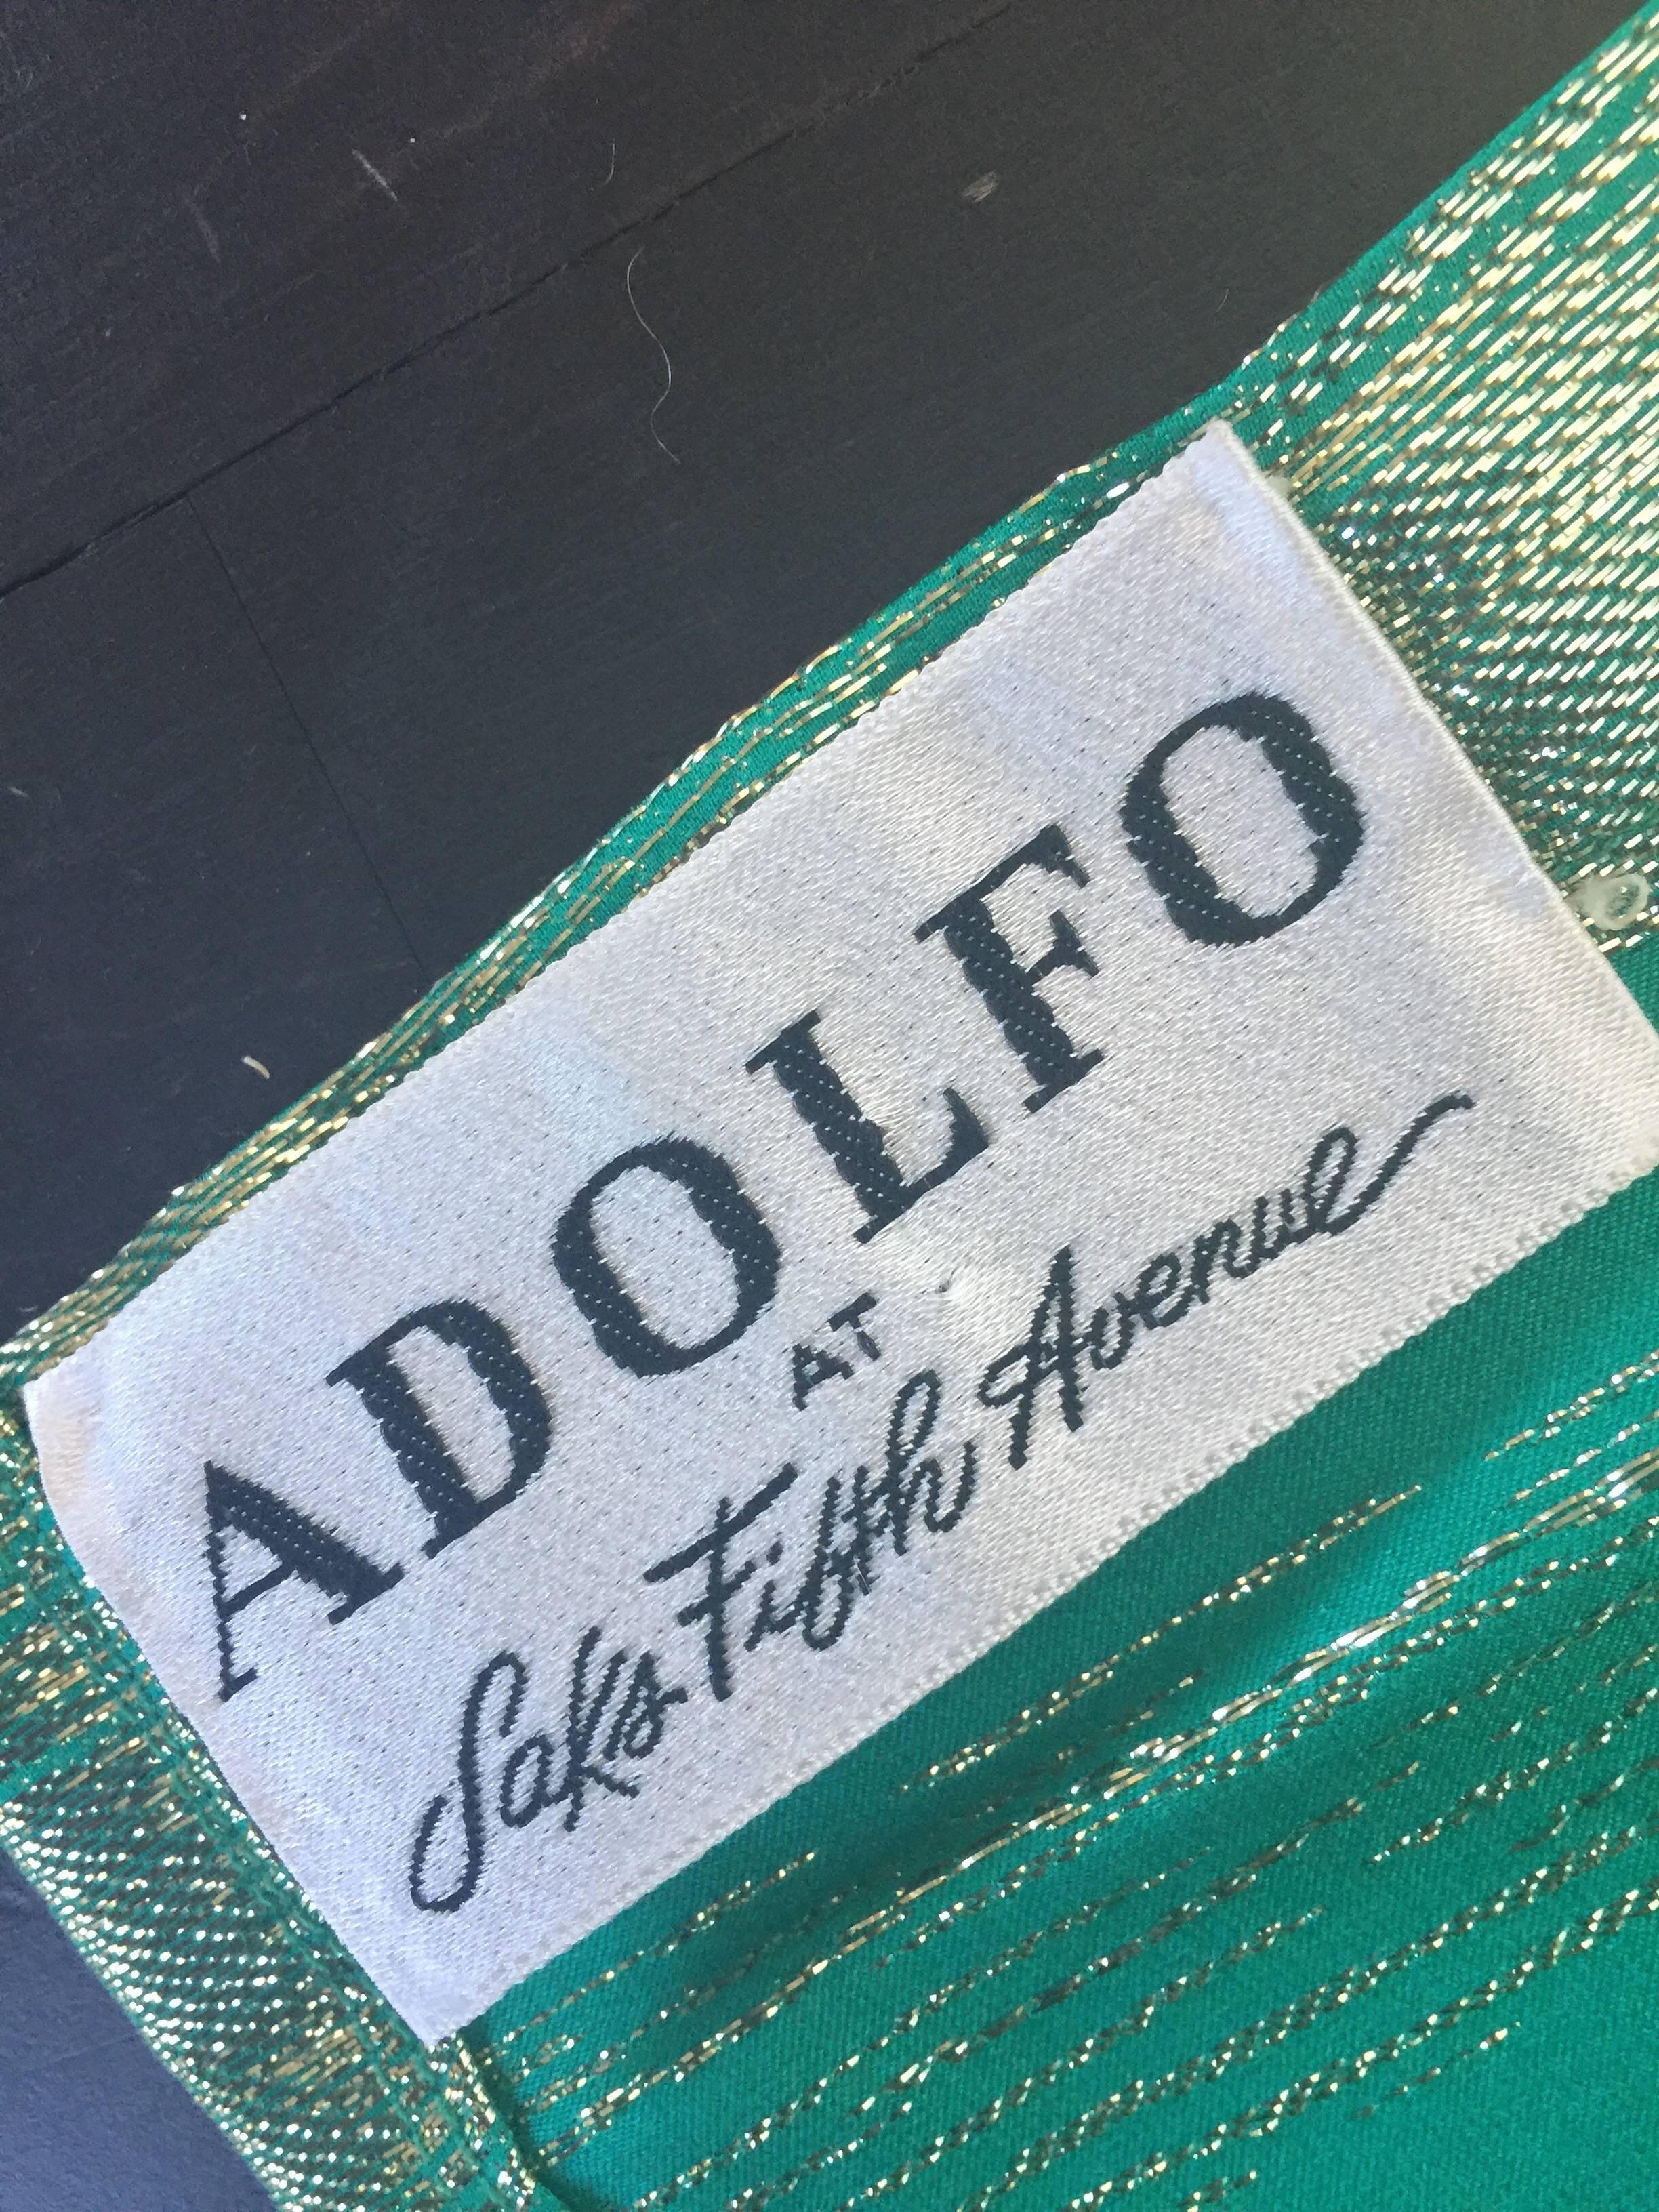 Adolfo metallic green blouse  In Fair Condition For Sale In New York, NY